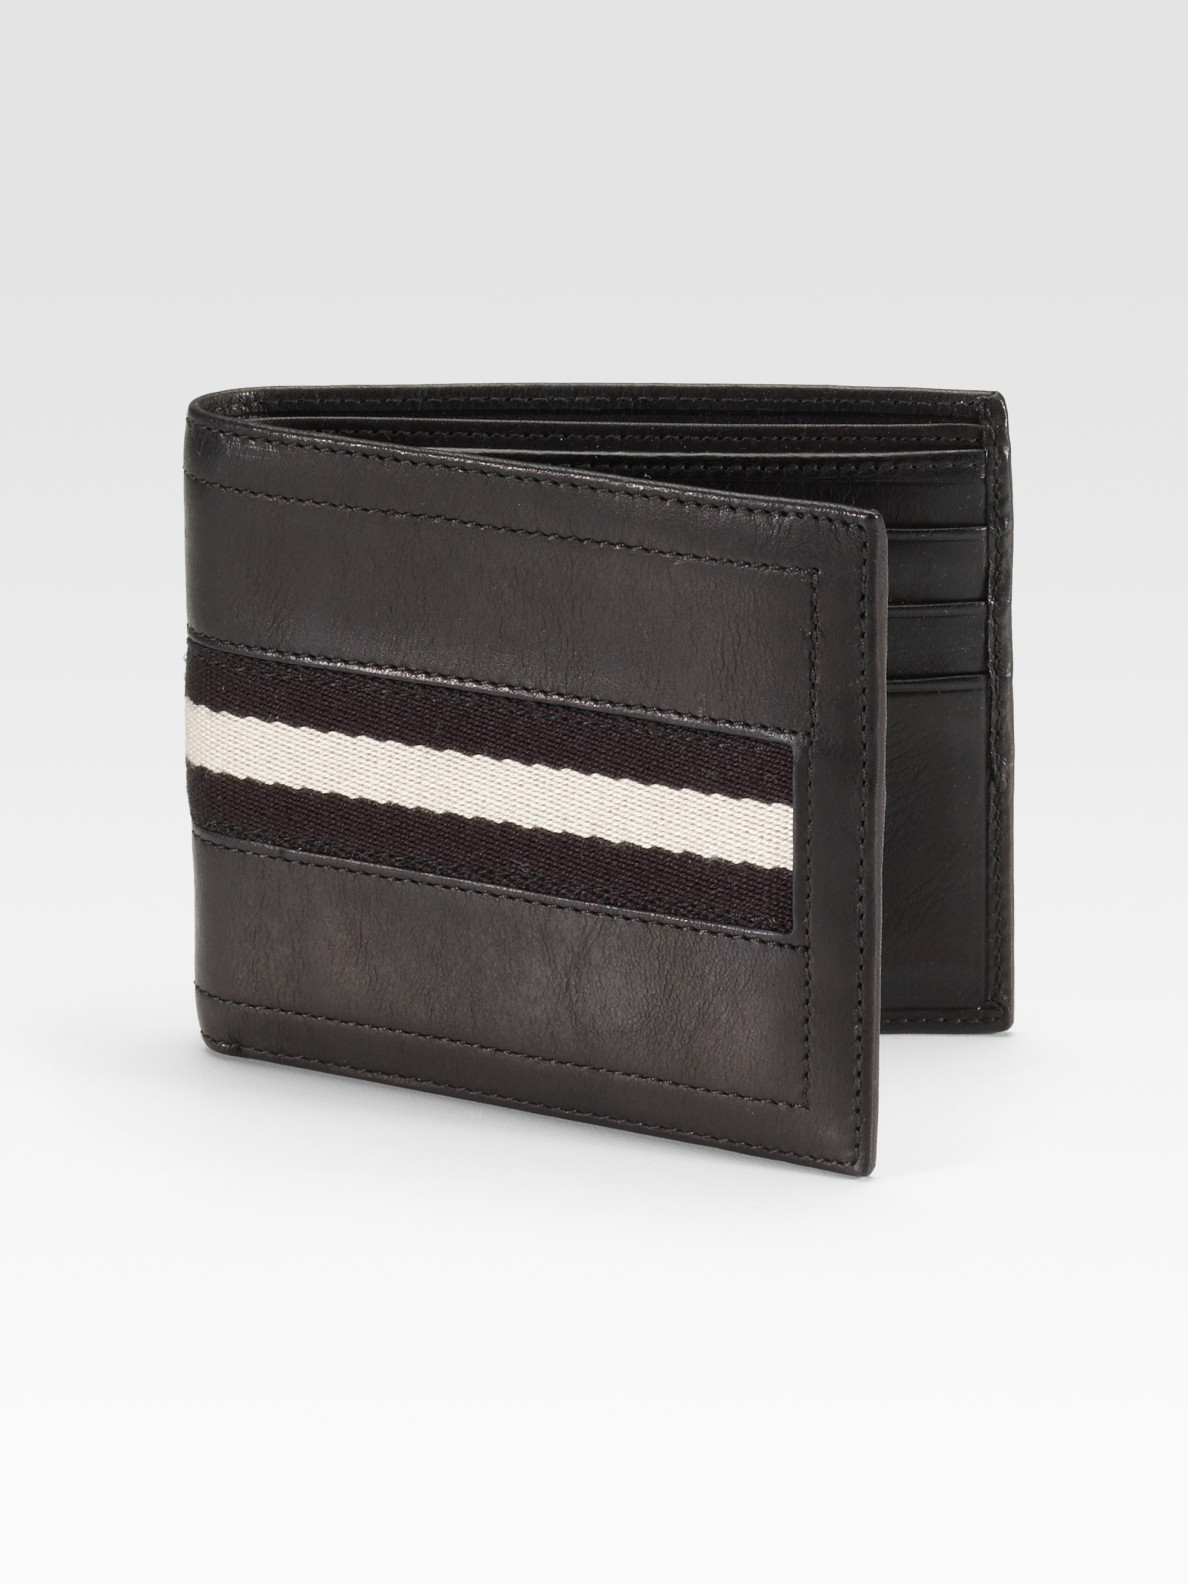 Bally Leather Wallet in Black for Men | Lyst